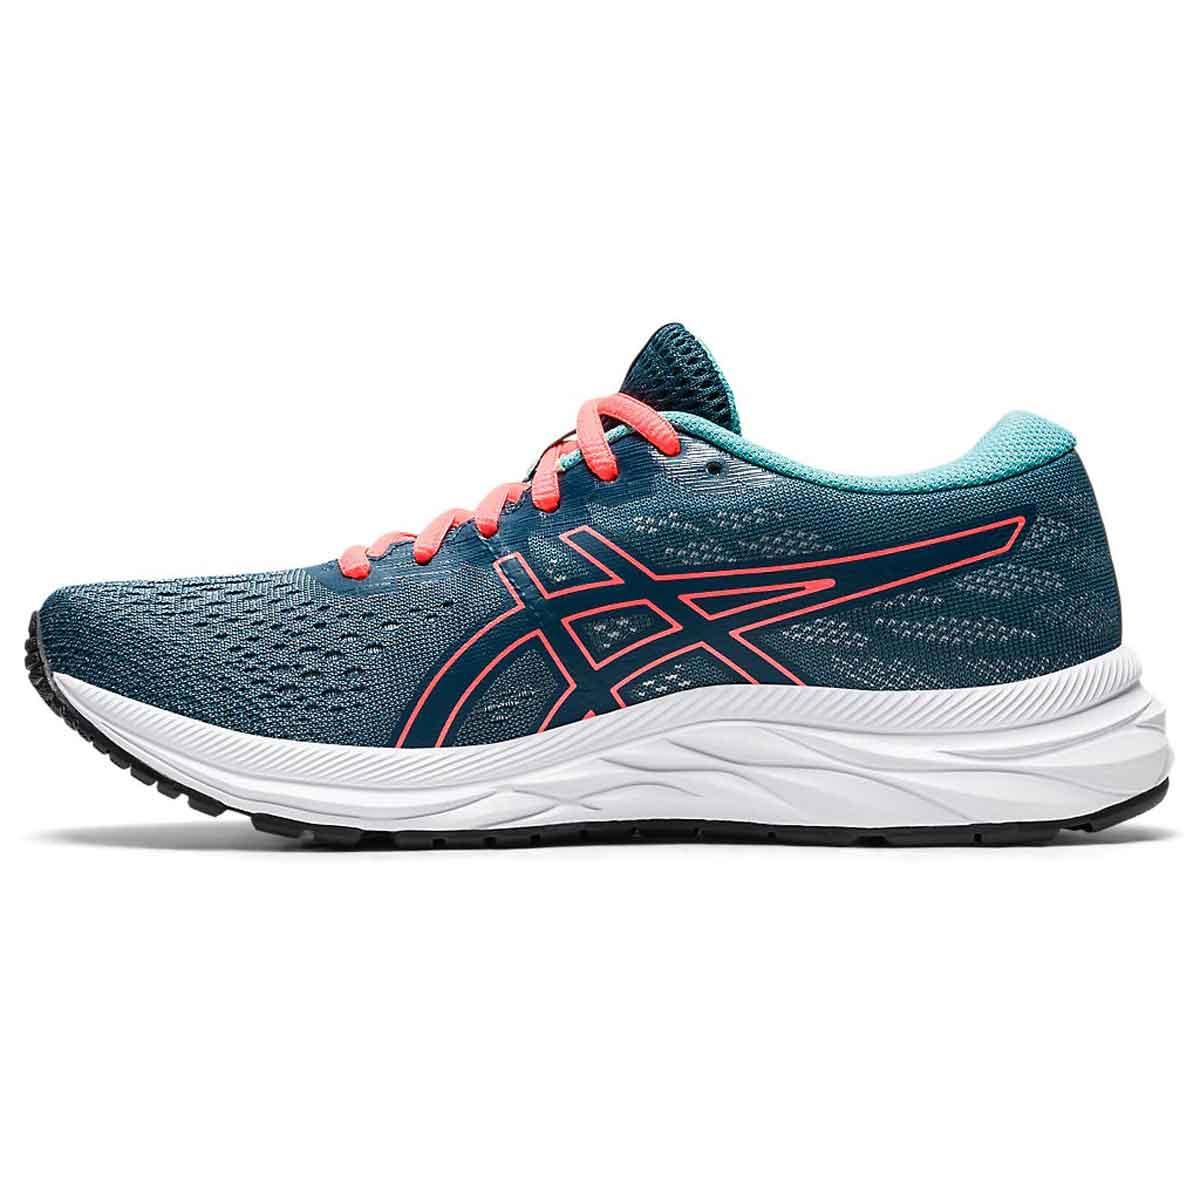 Buy Asics Gel-Excite 7 Womens Running Shoes (Magnetic Blue/Sunrise Red ...